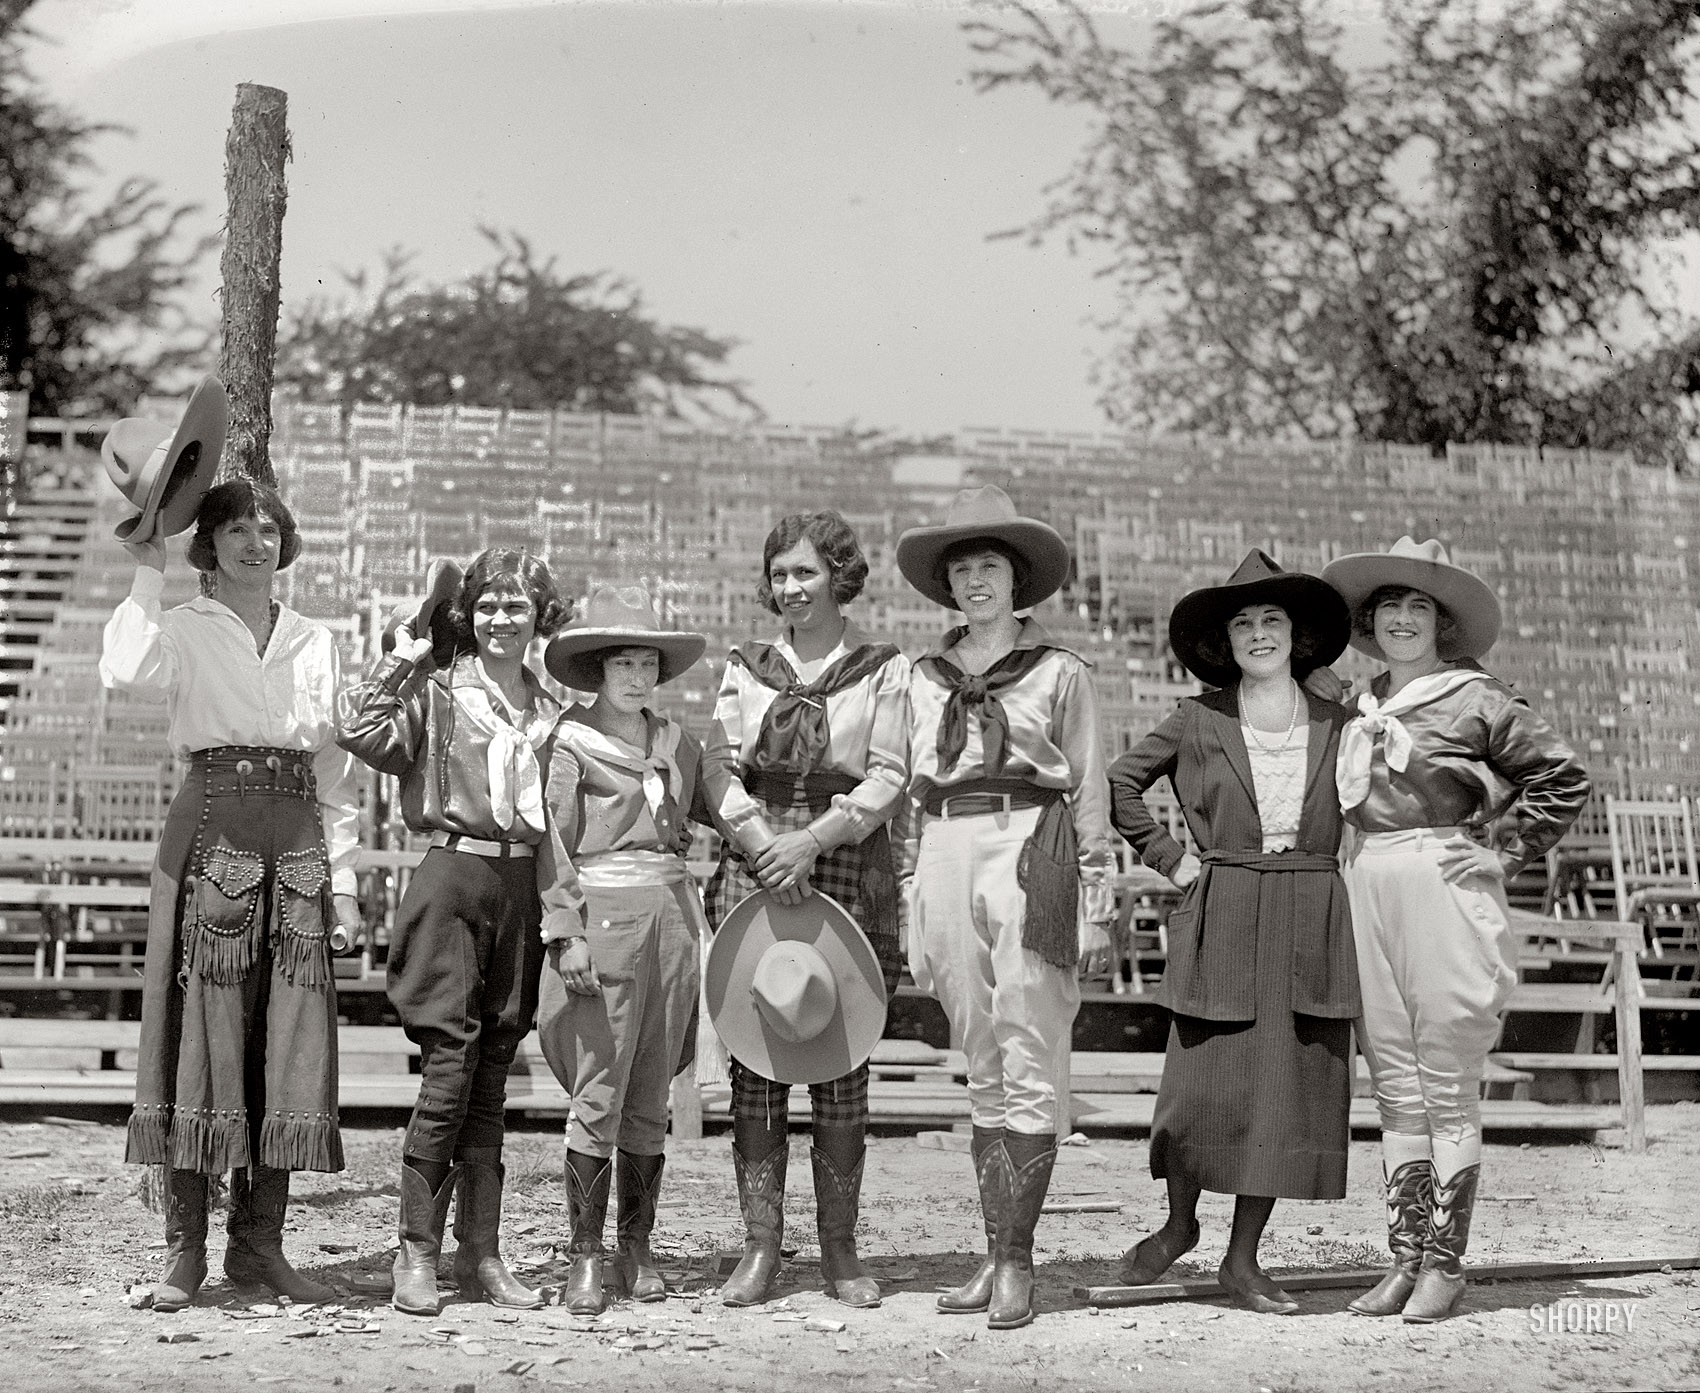 May 29, 1923. "Wild West performers." At the Shrine convention in Washington, D.C. National Photo Company Collection glass negative. View full size.